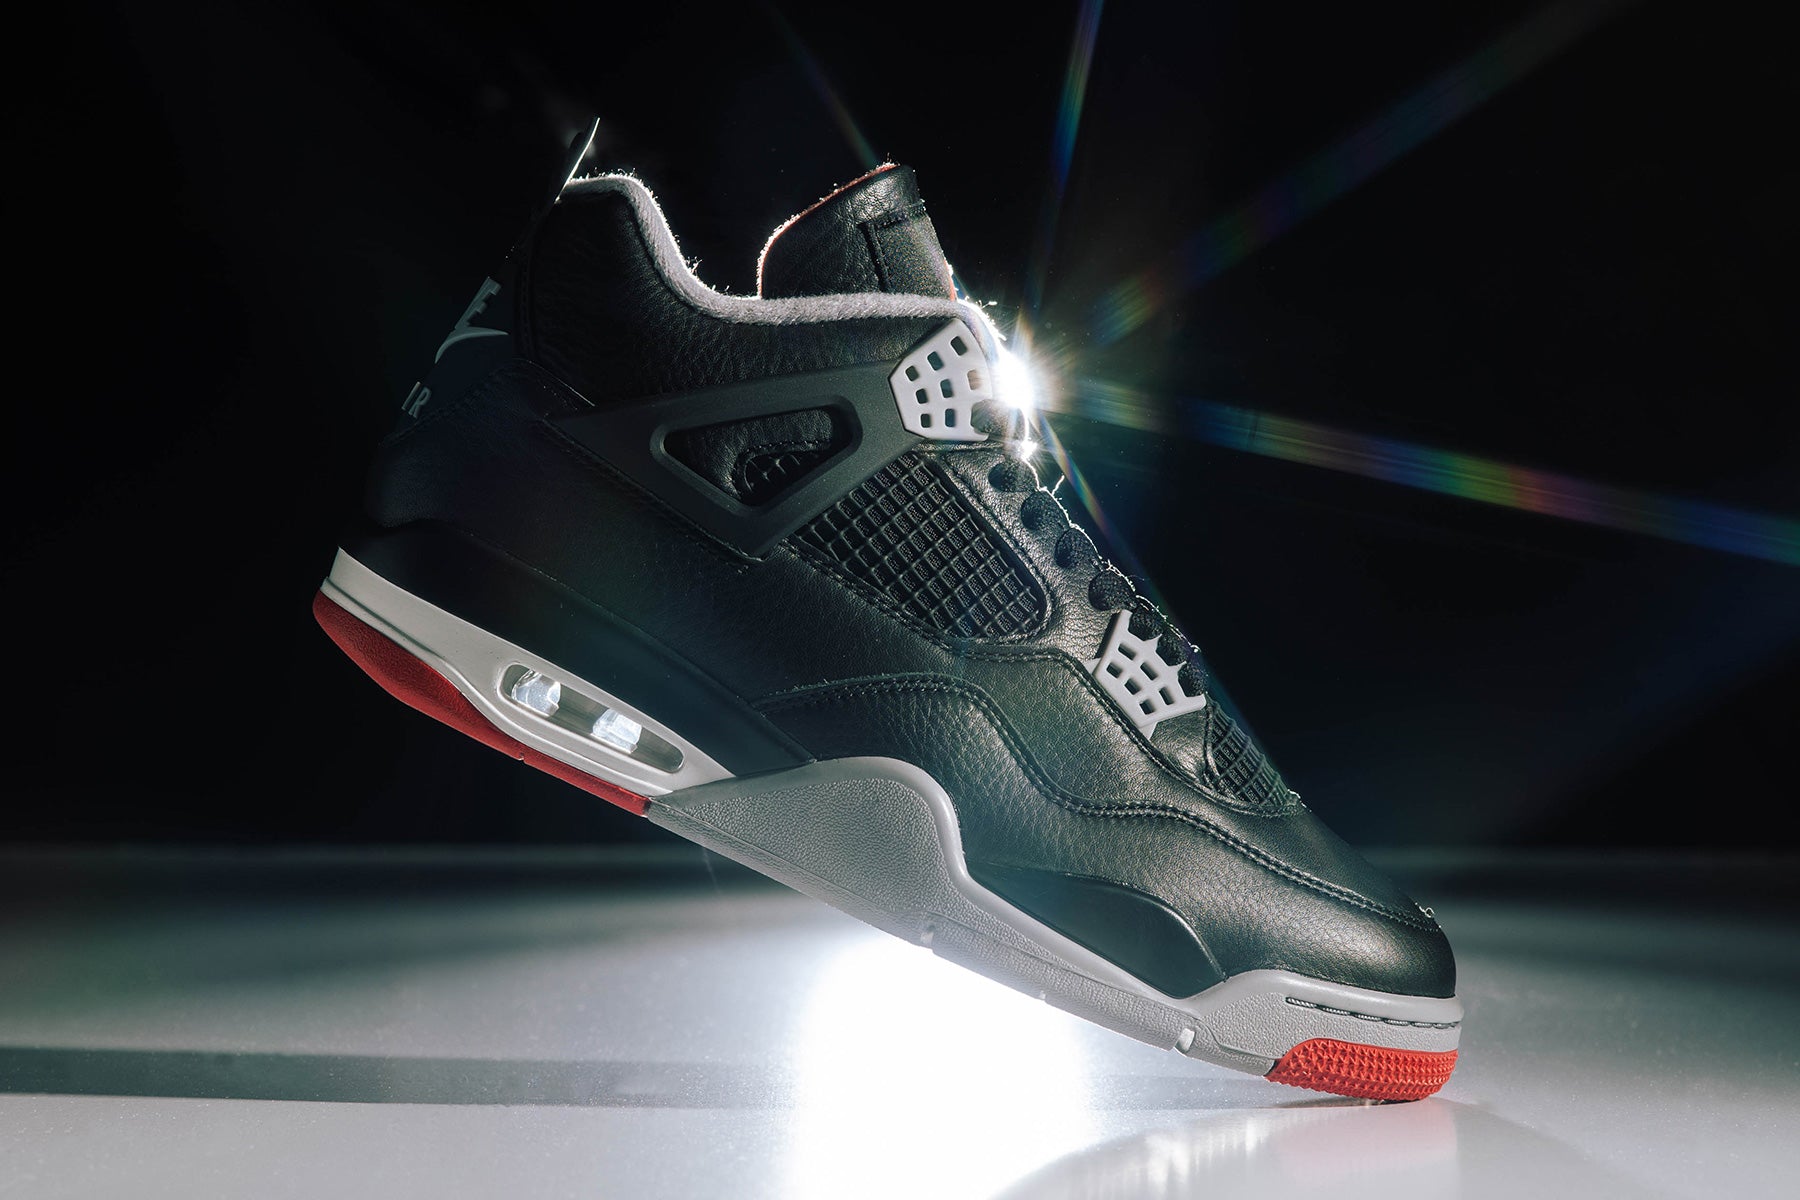 Air Jordan 4 Retro 'Bred Reimagined' - Black/Fire Red/Cement Grey, , large image number null